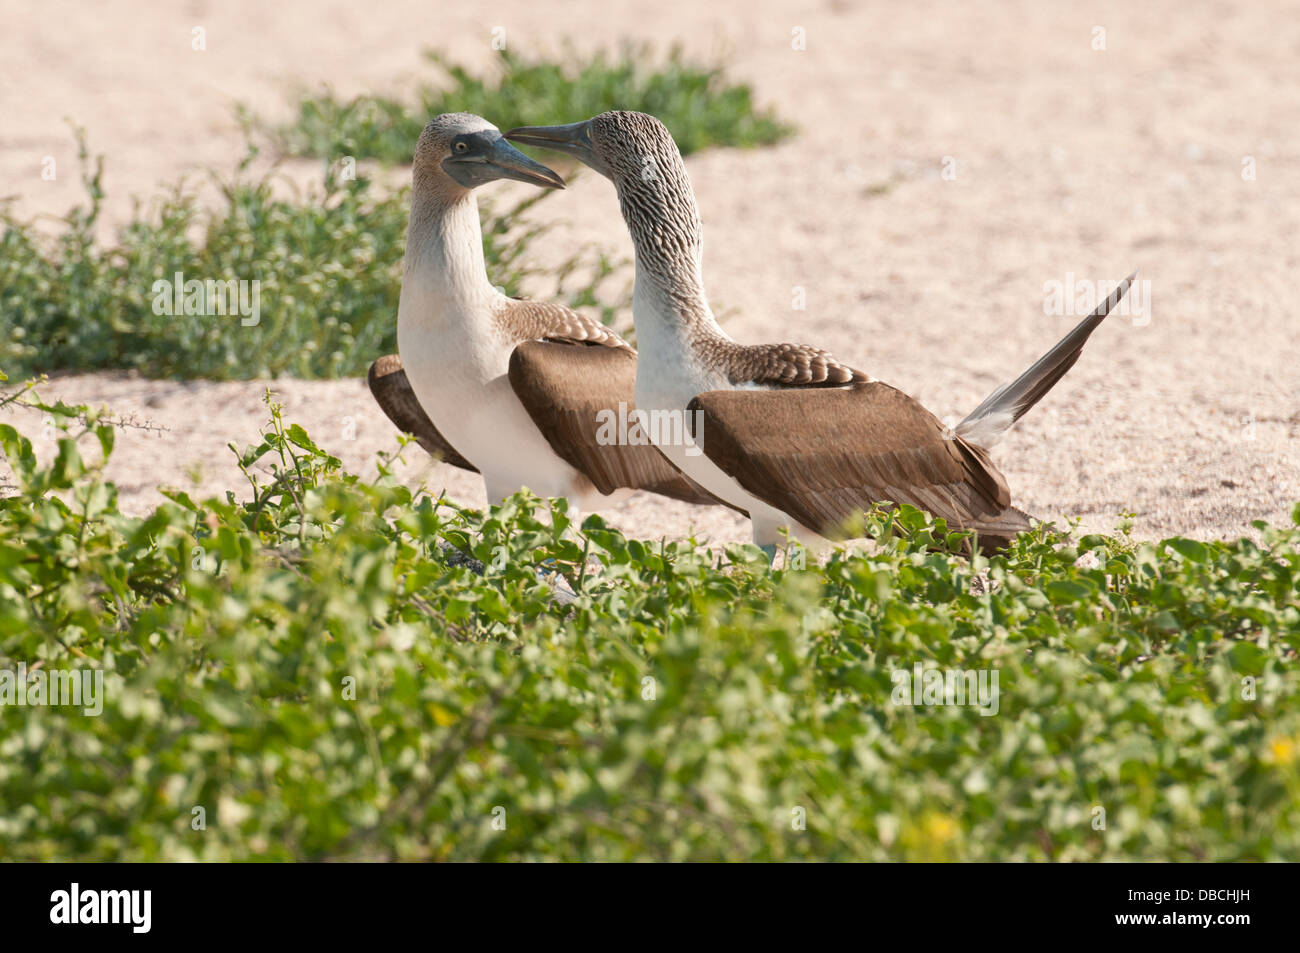 Stock photo of a breeding pair of blue footed boobies. Stock Photo